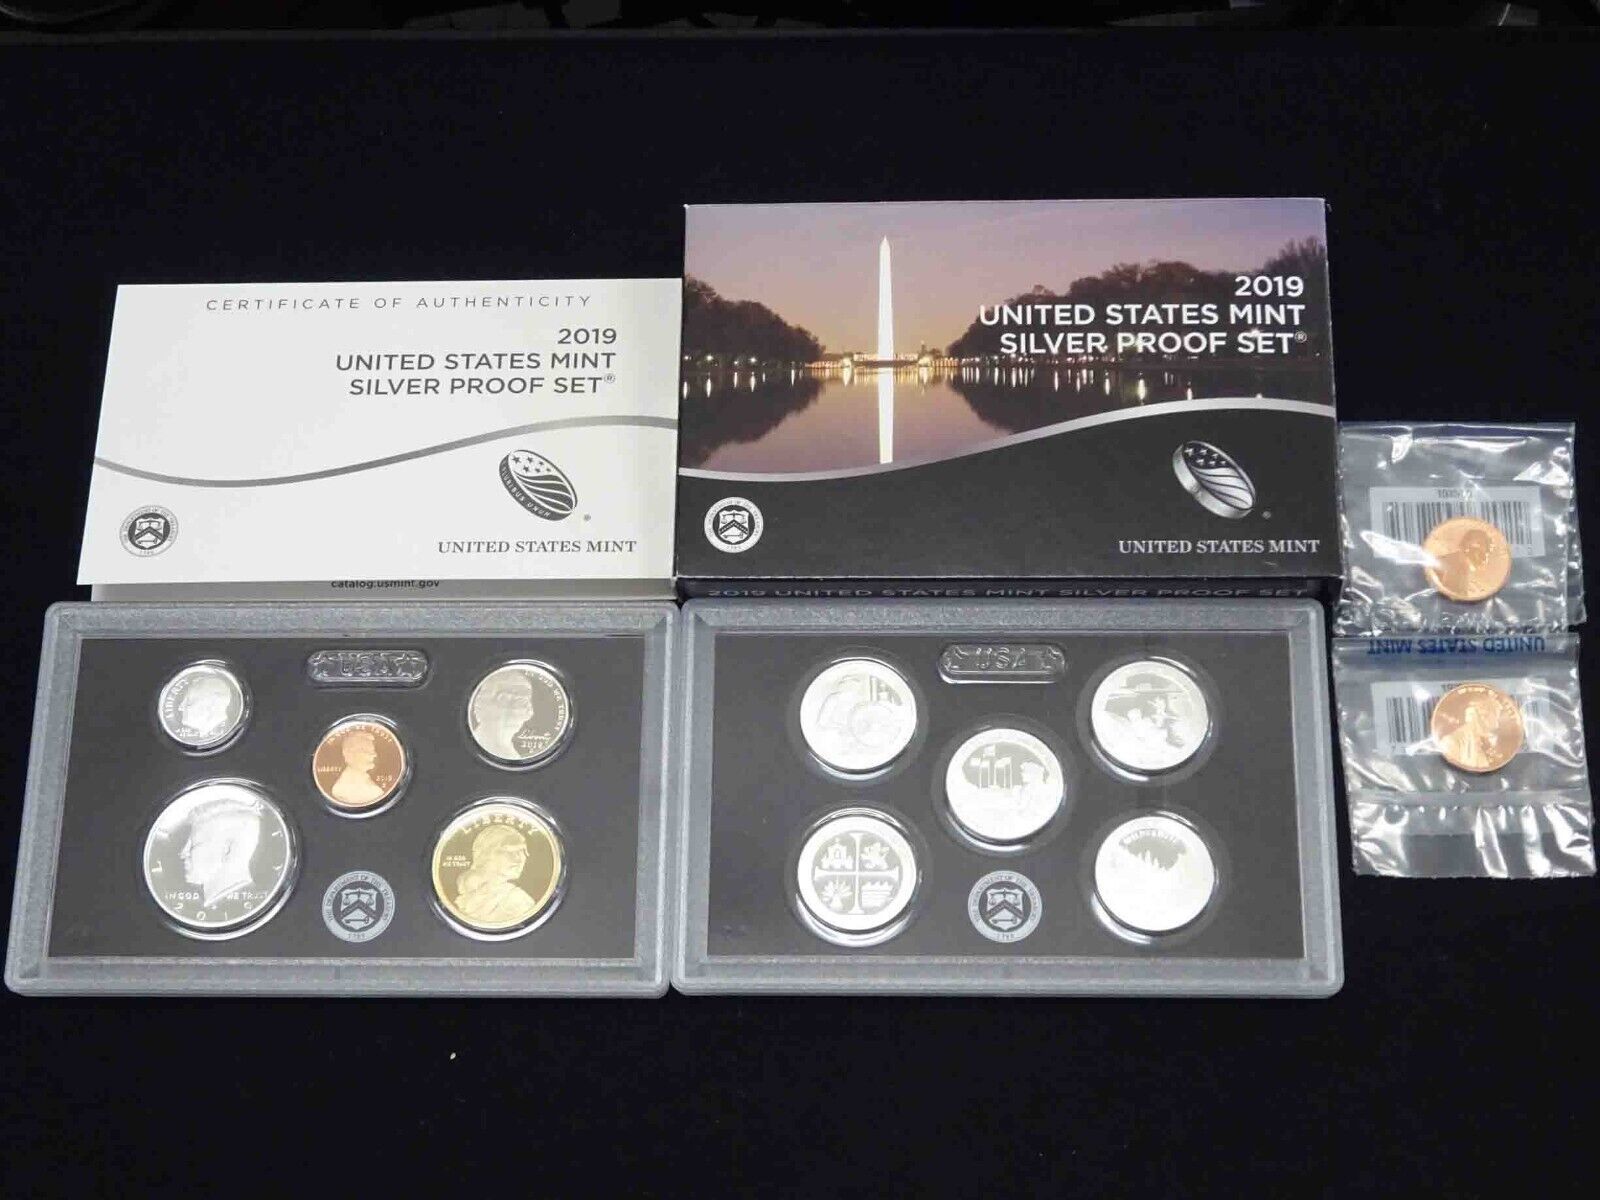 Primary image for 2019 United States Mint Silver Proof Set